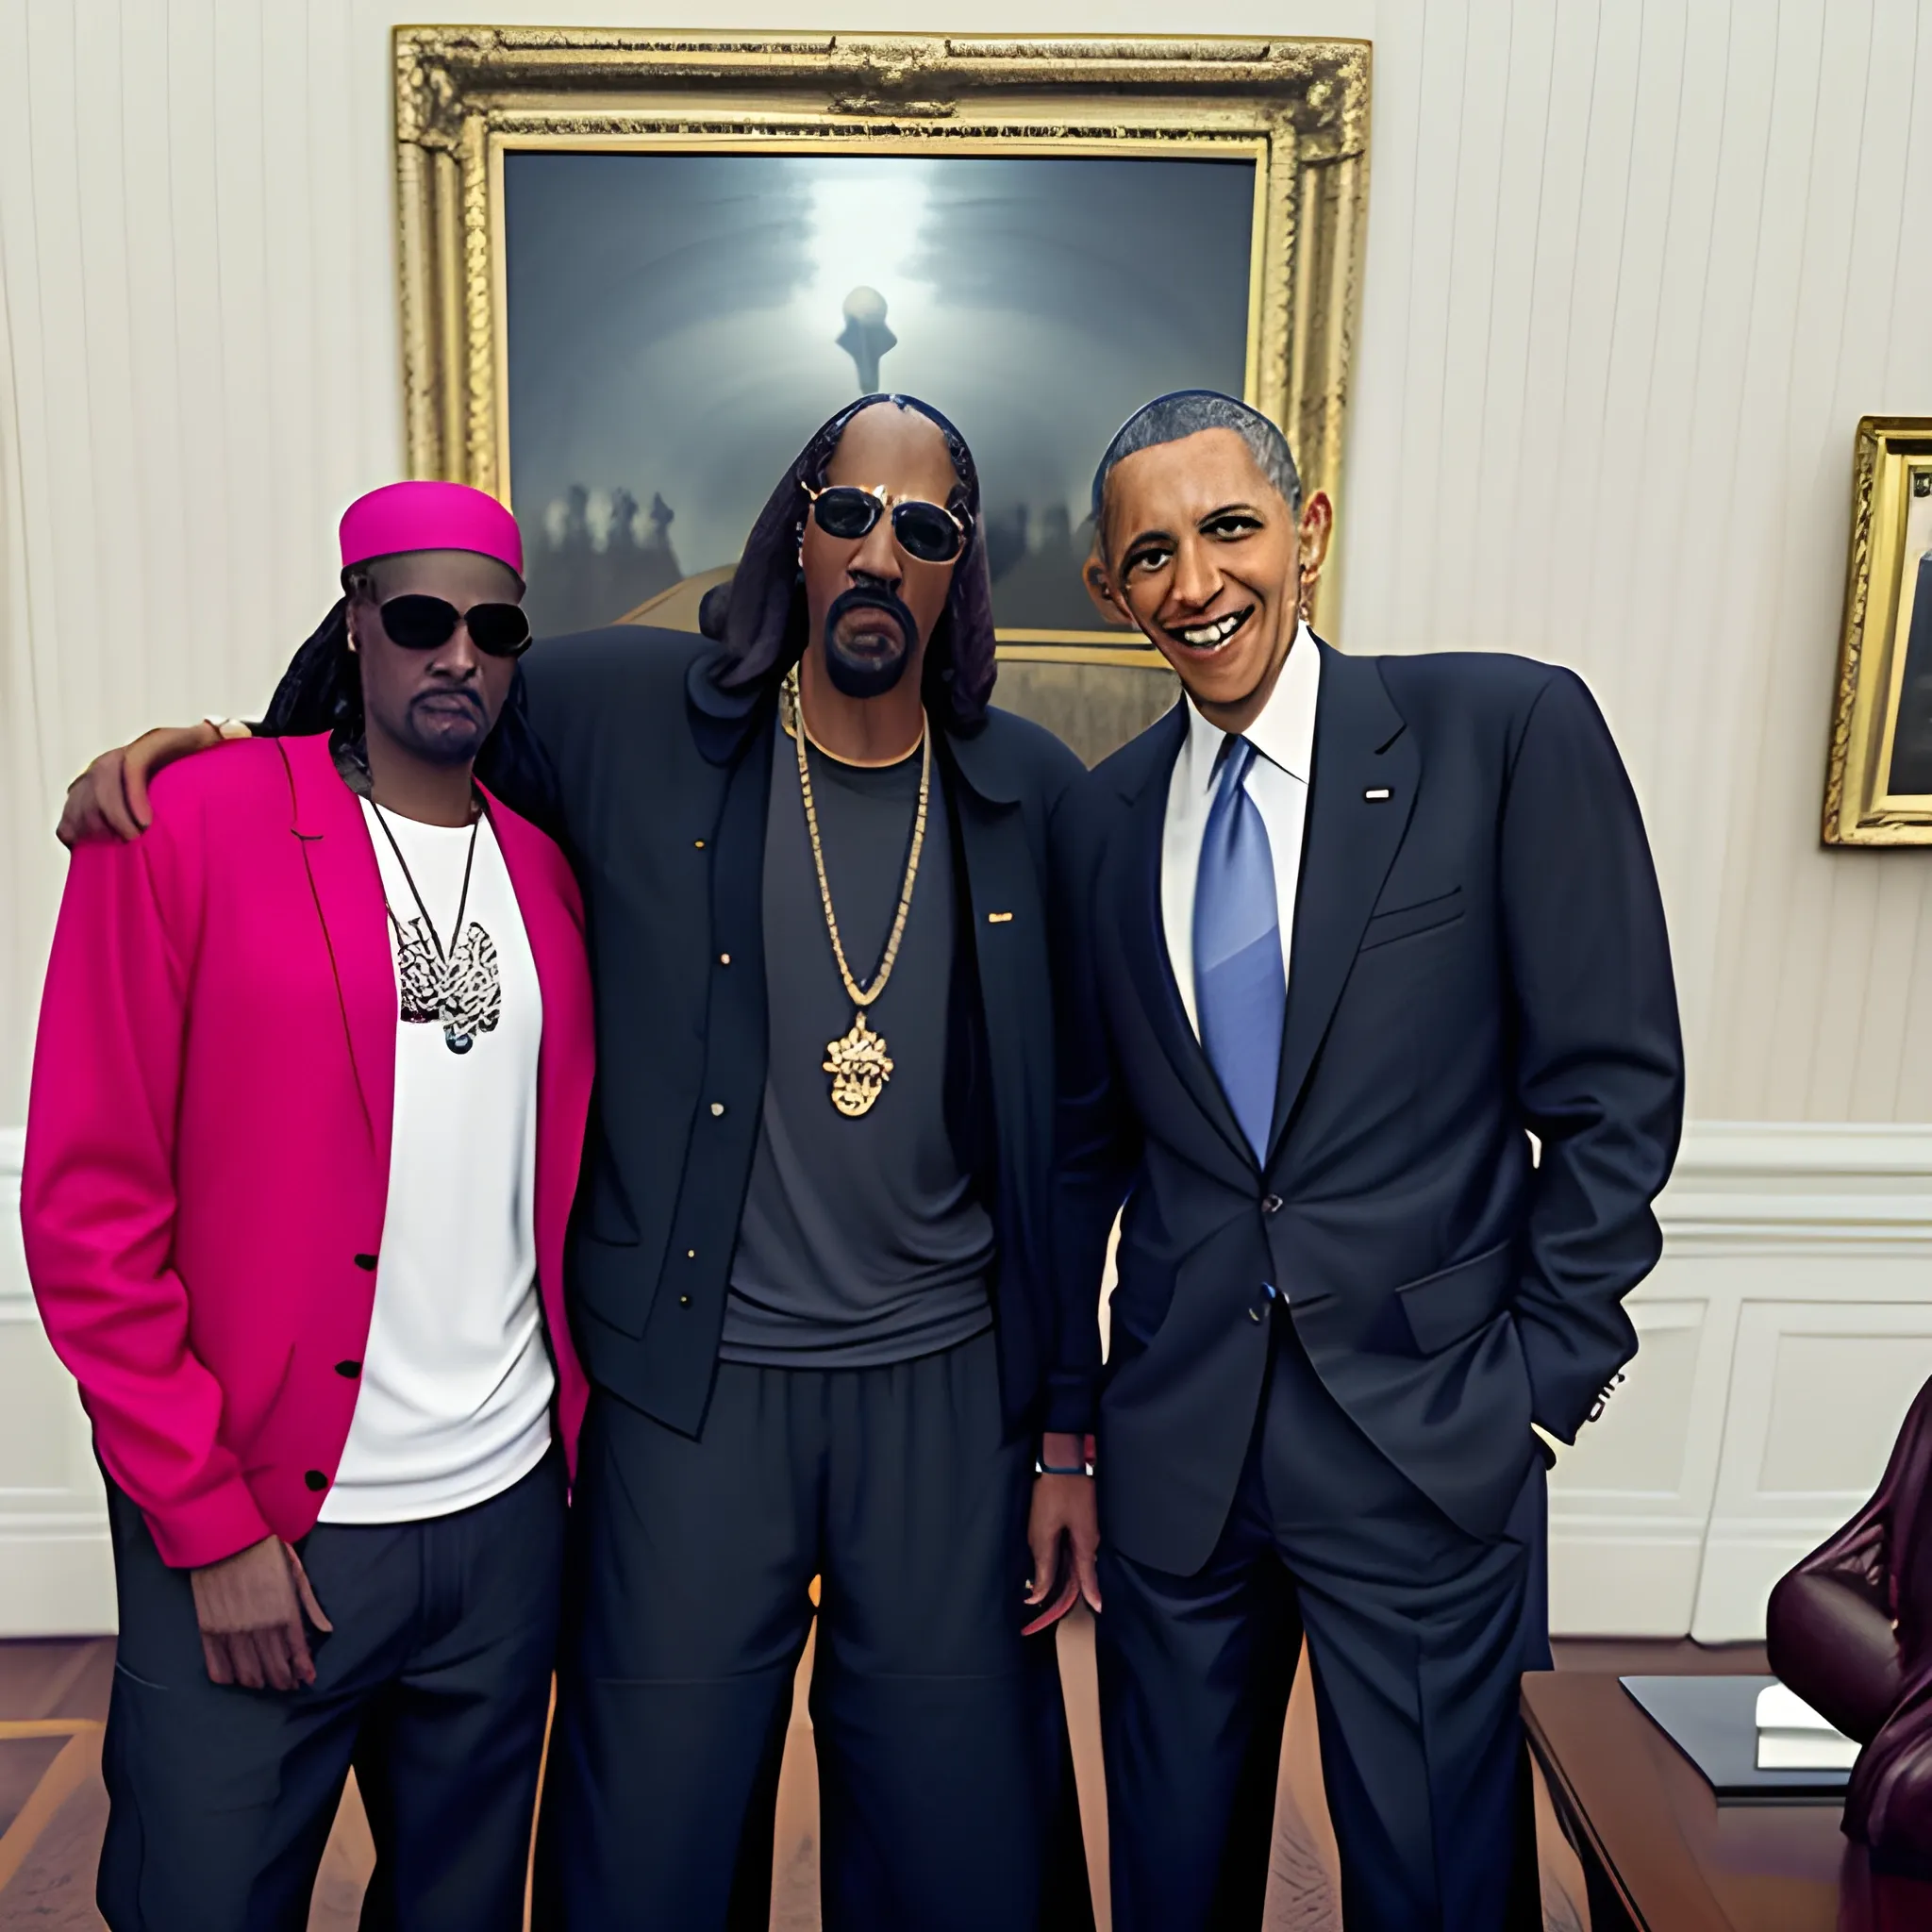 snoop dog hanging out with obama and Shaquille O'Neal
in the white house office and they are all wearing expensive clothing, 3D, realistic, 4k quality